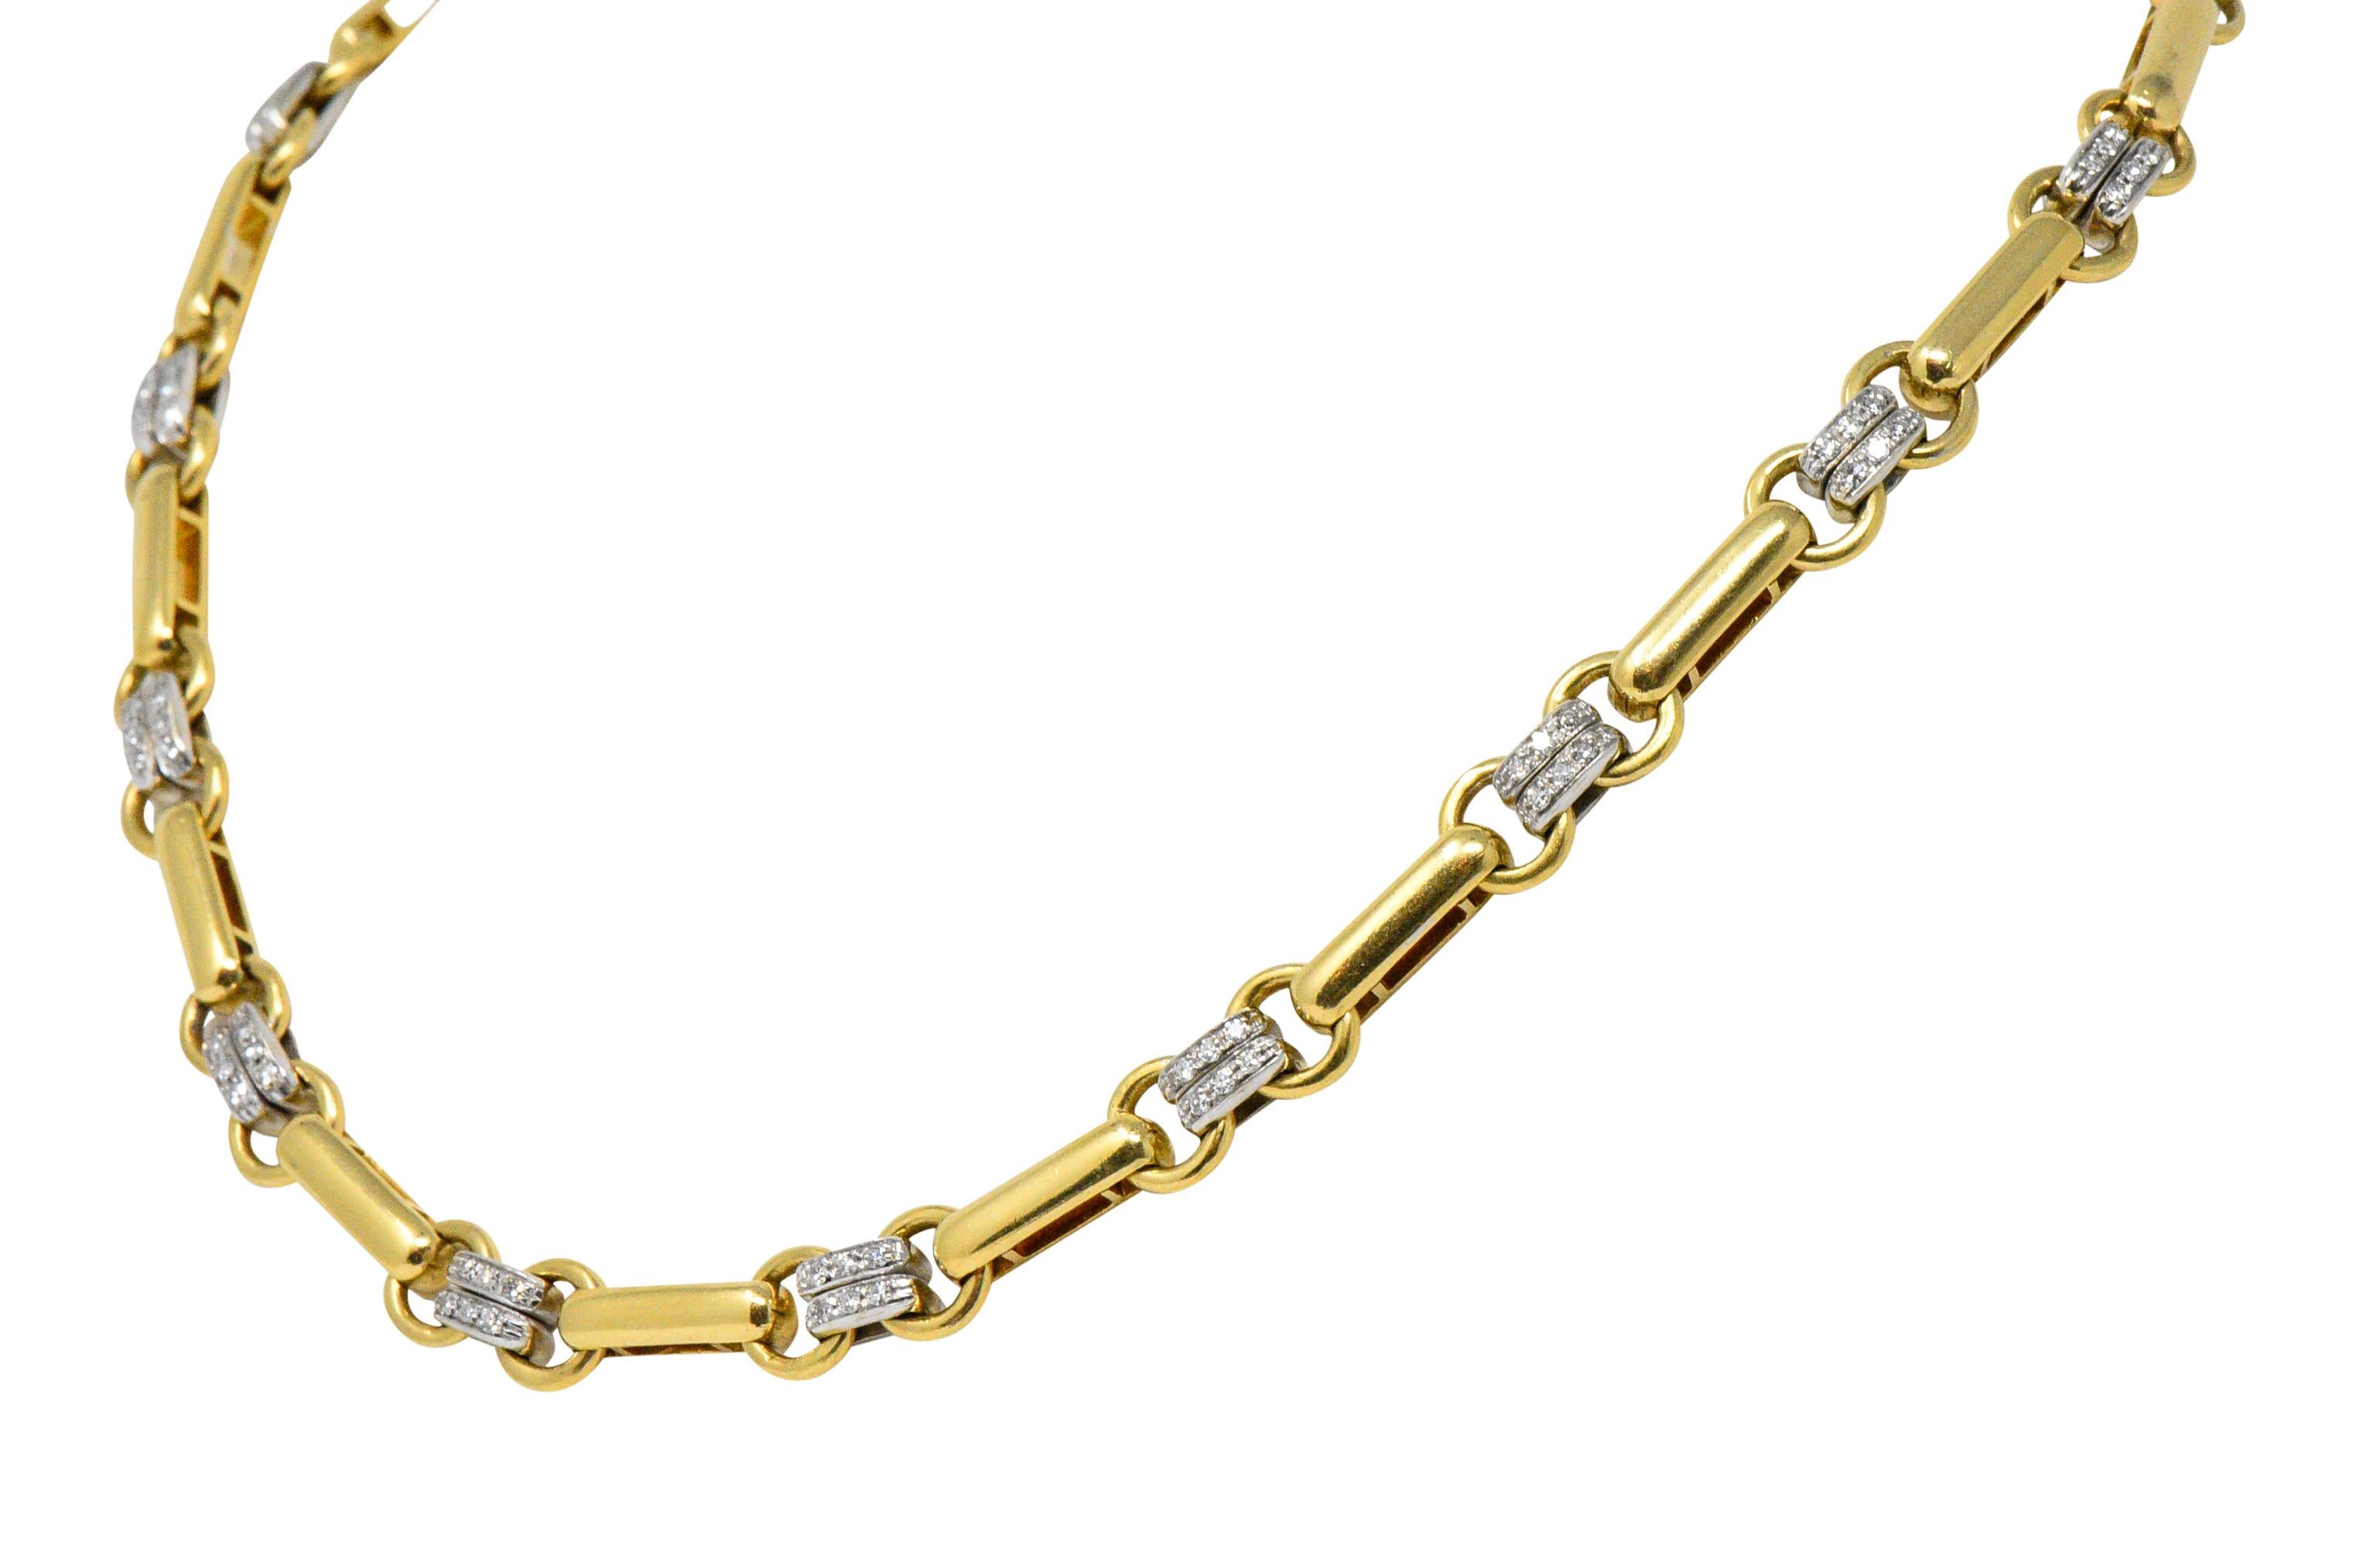 Link style necklace comprised of yellow gold elongated bar links terminating as circular links

Alternating with double rowed white gold spacer links bead set with single cut diamonds weighing approximately 1.05 carats total; G/H color and VS to SI